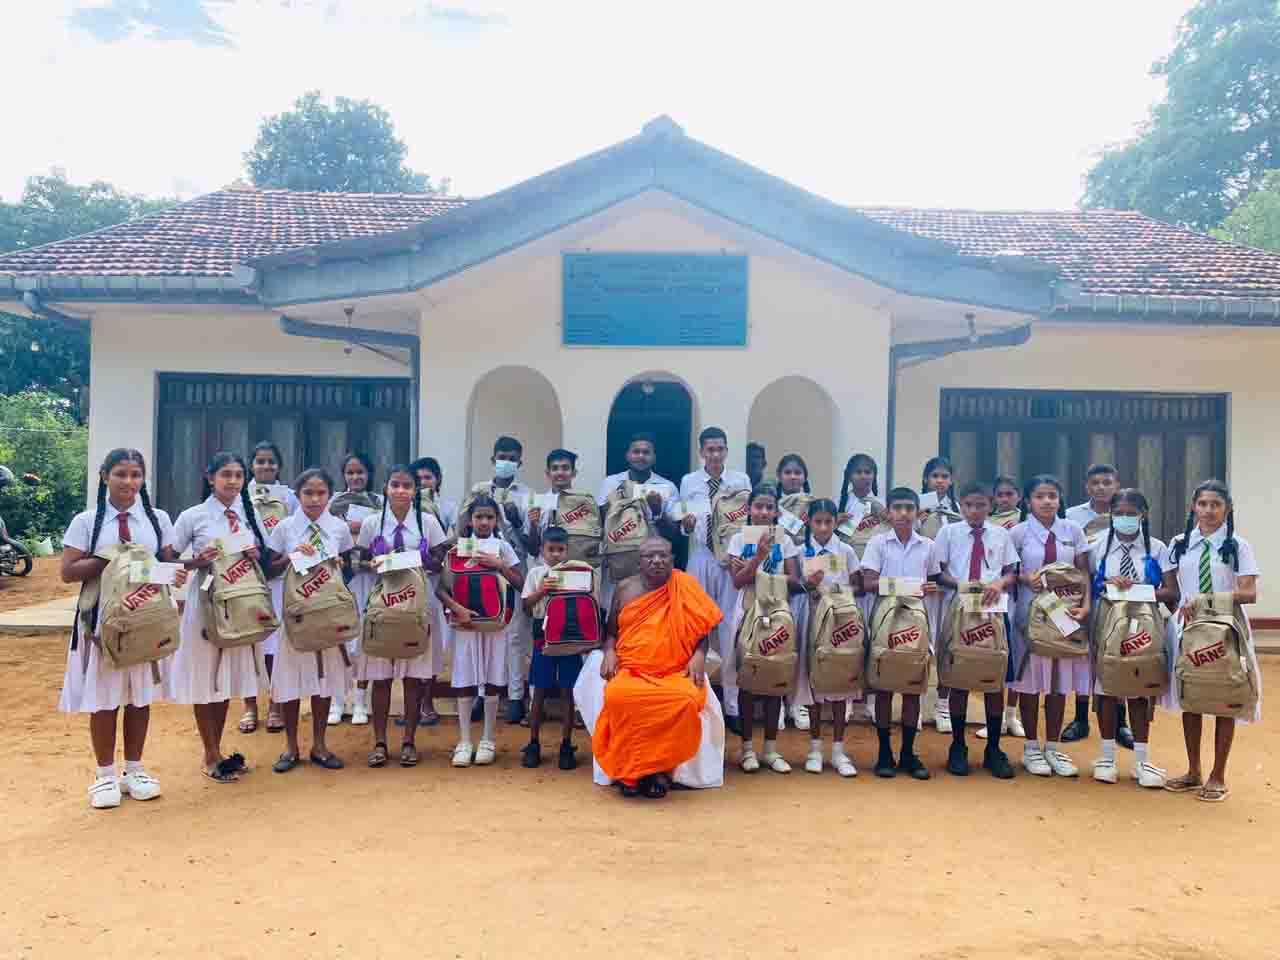 The program to provide school uniforms, school bags, books and shoe vouchers for pre-school and scholarship recipient children to be held in Lunugamwehera Unathuwewa area of Hambantota district in the year 2024 